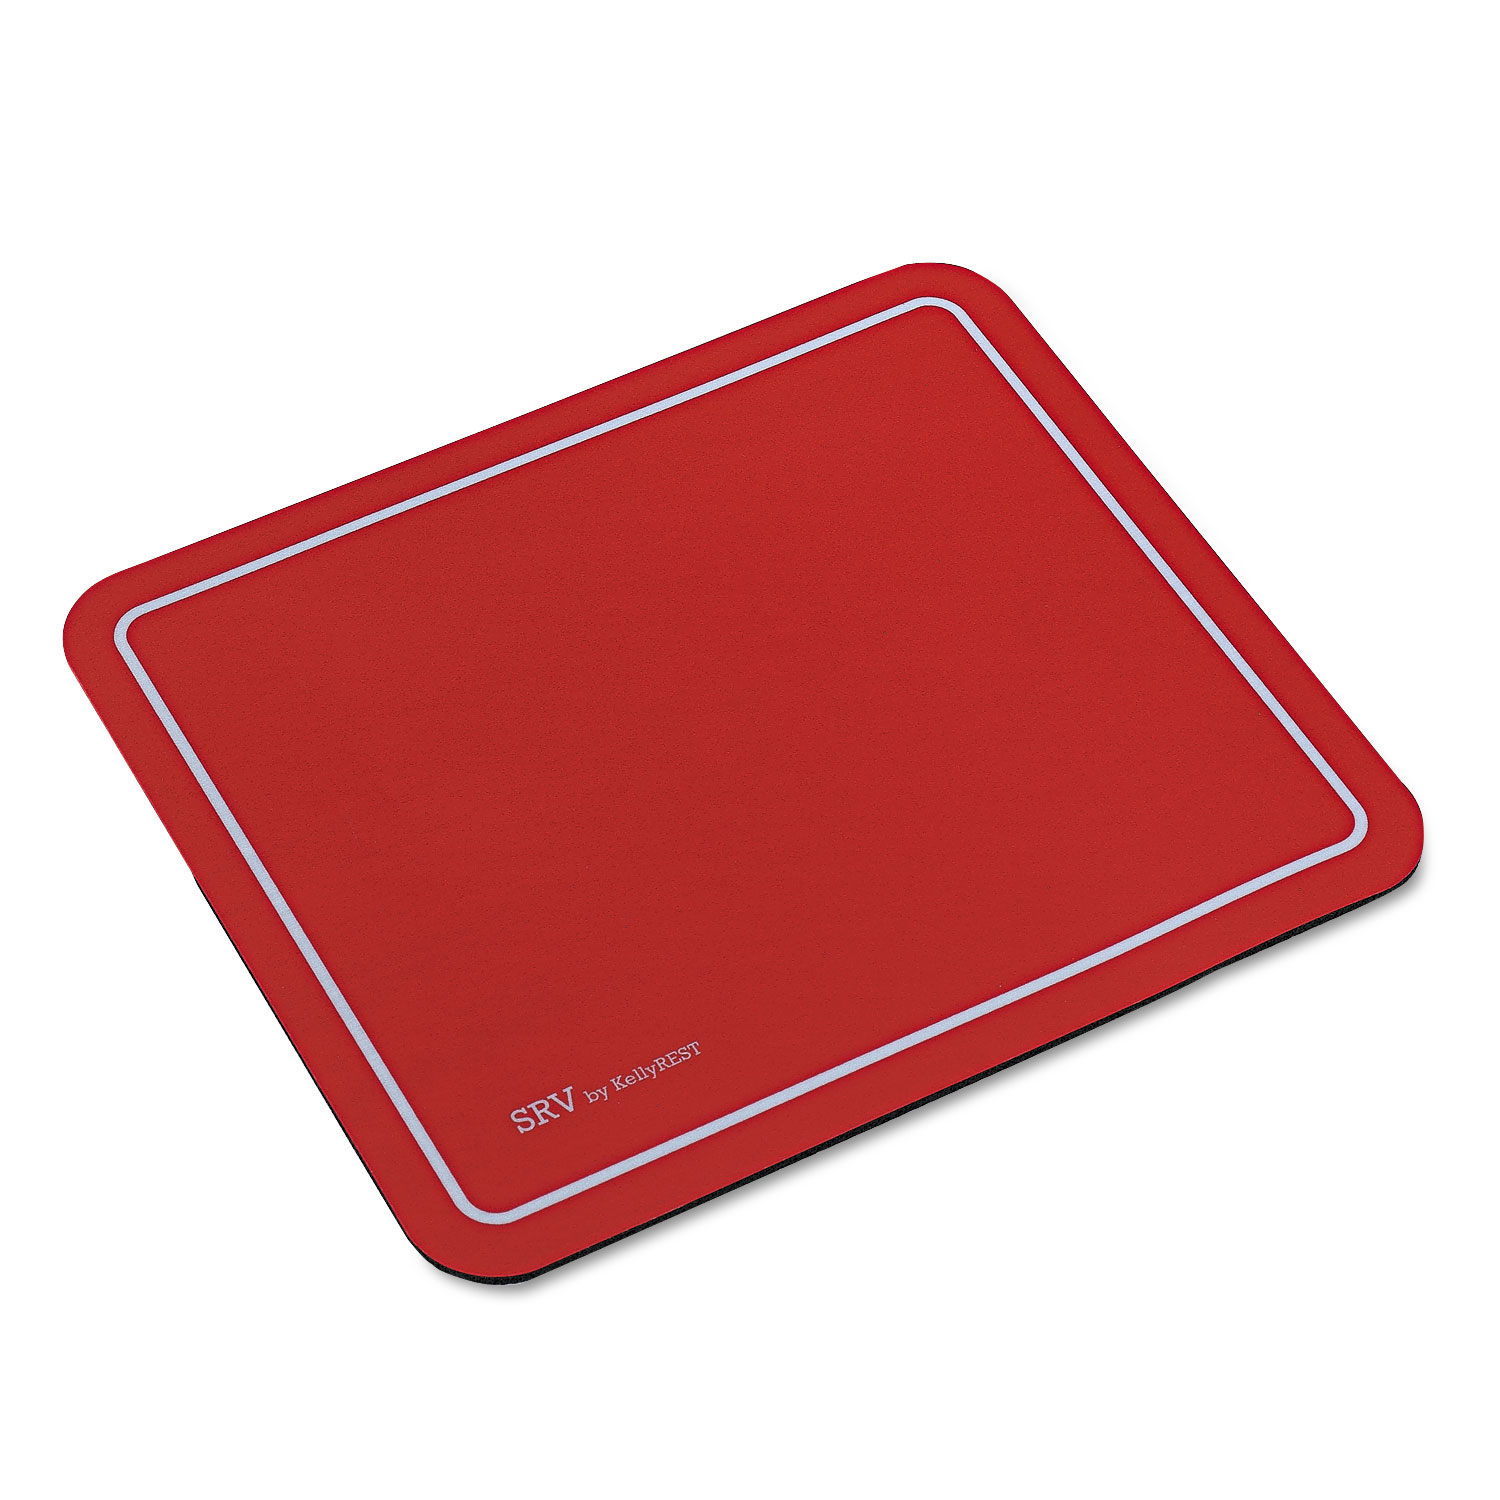  Kelly Computer Supply KCS81108 Optical Mouse Pad, 9 x 7-3/4 x 1/8, Red (KCS81108) 